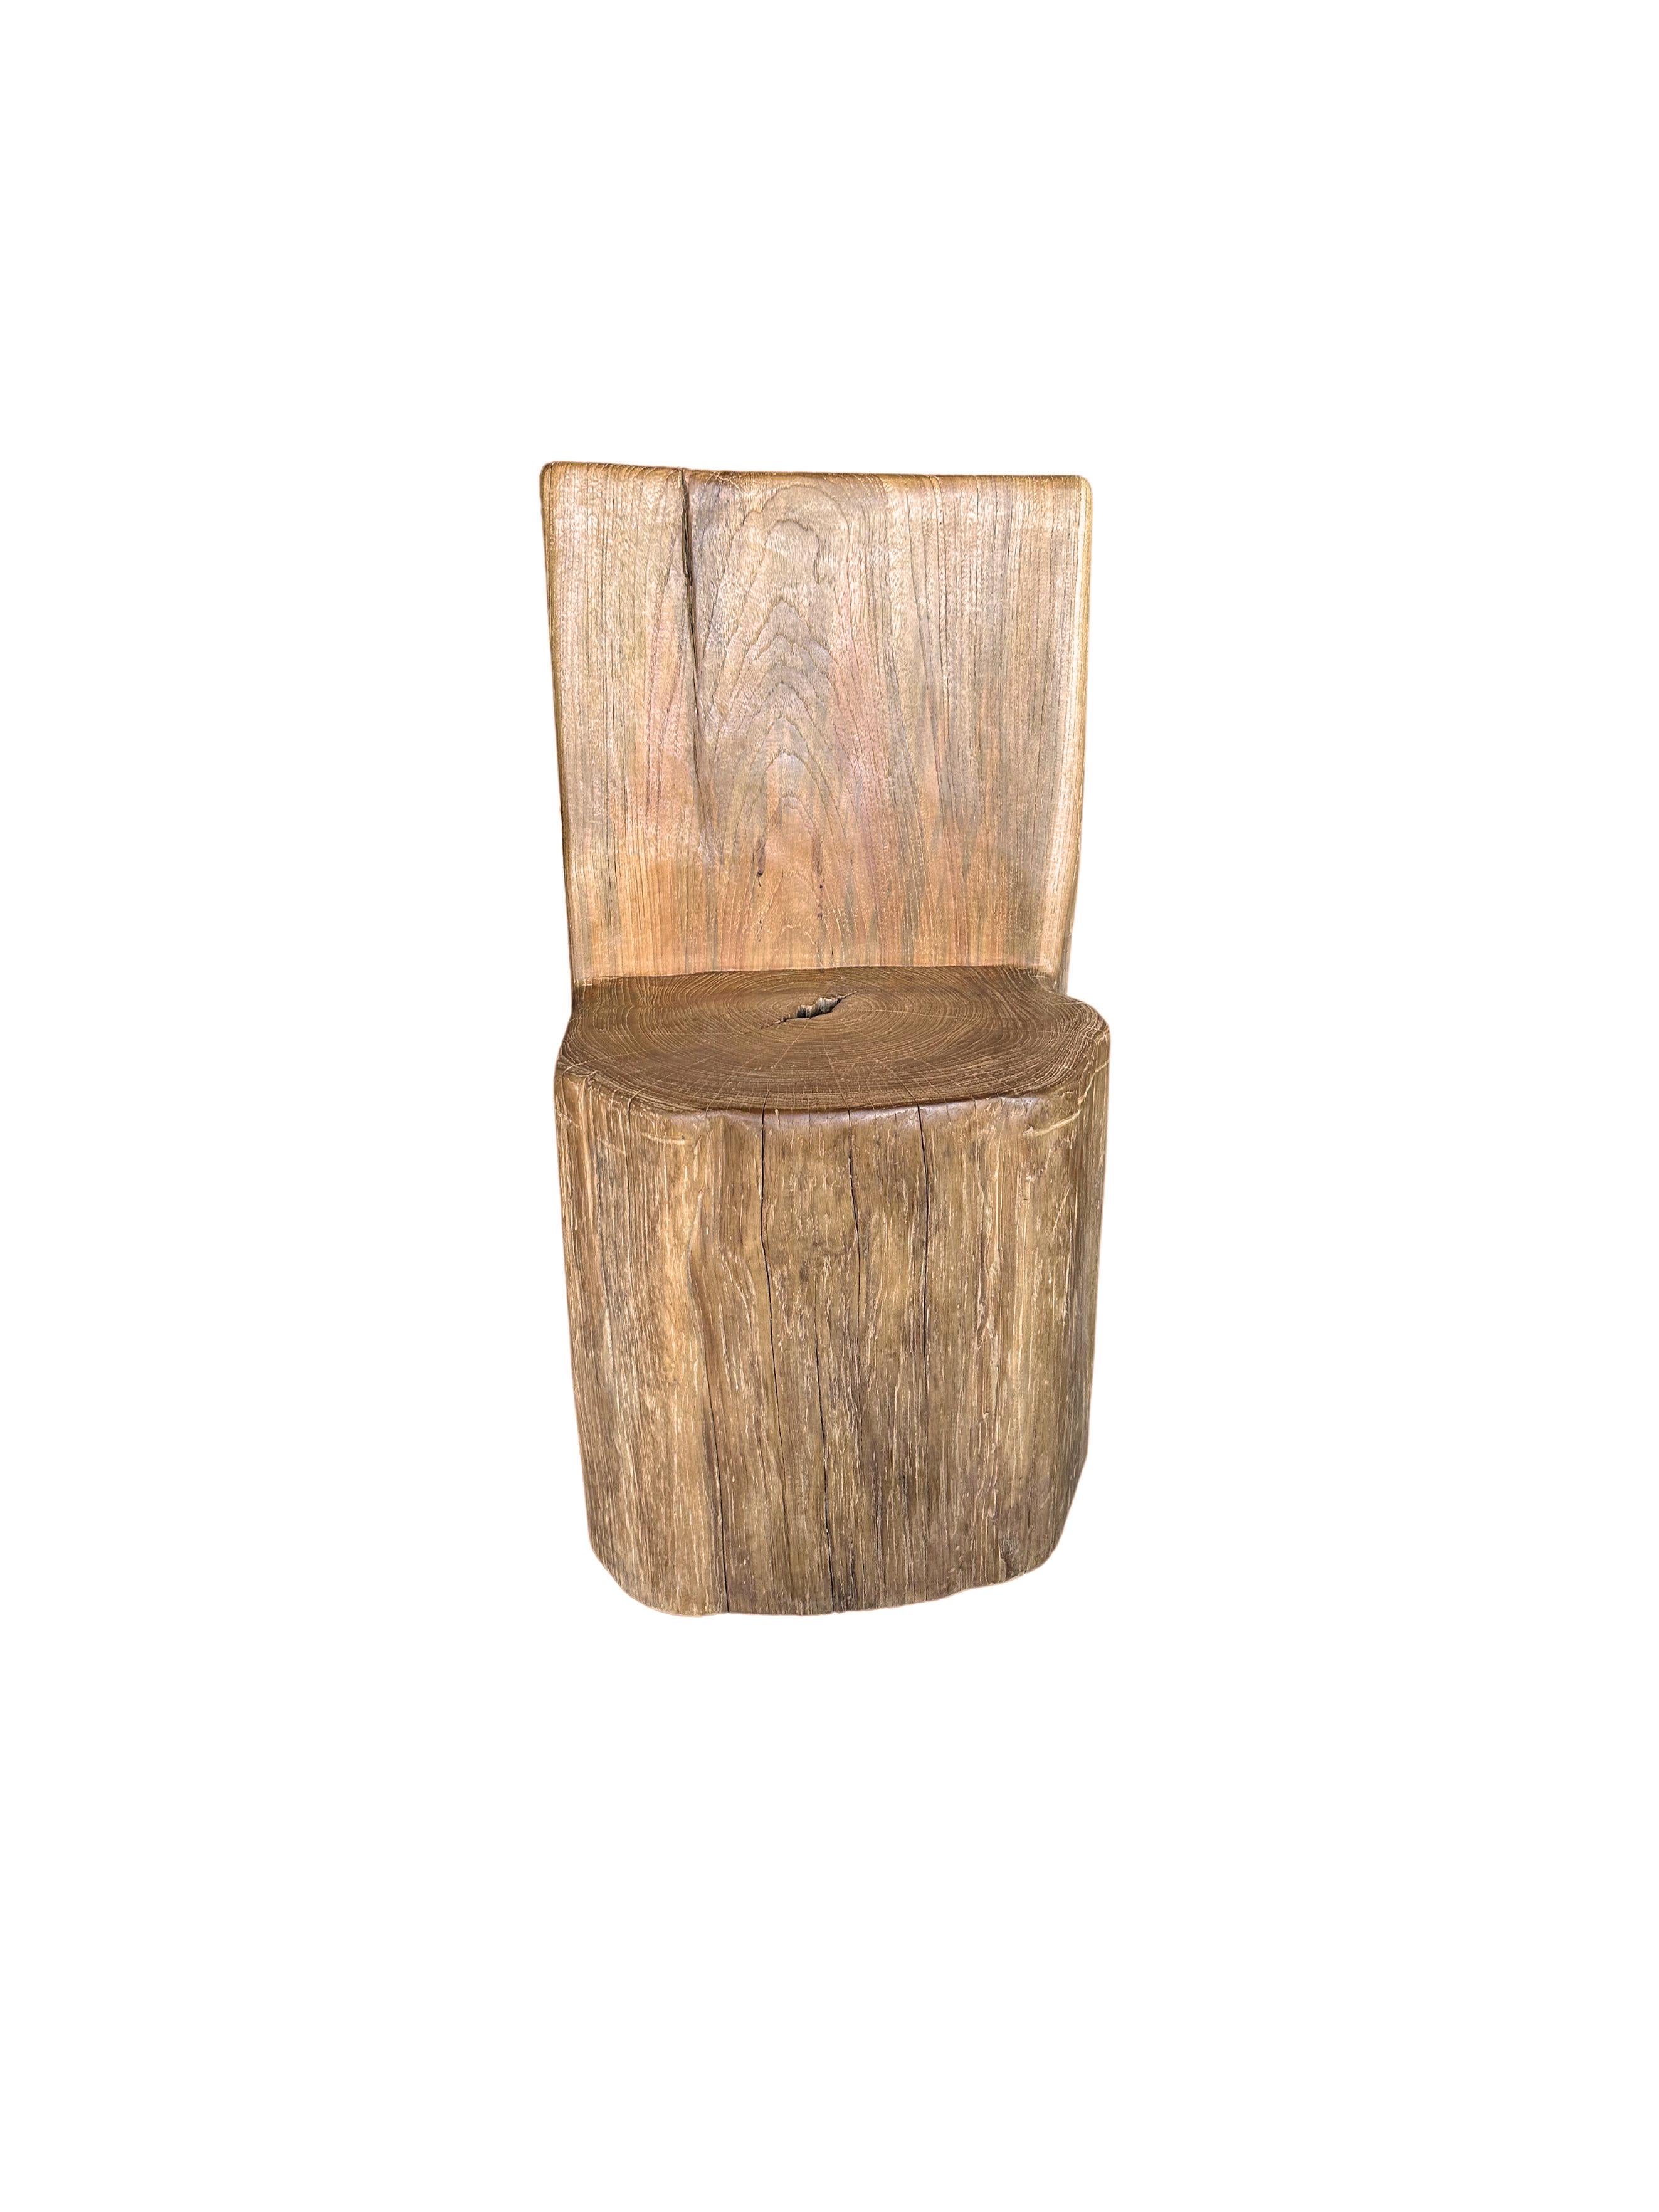 This solid teak wood chair was uniquely crafted from a 